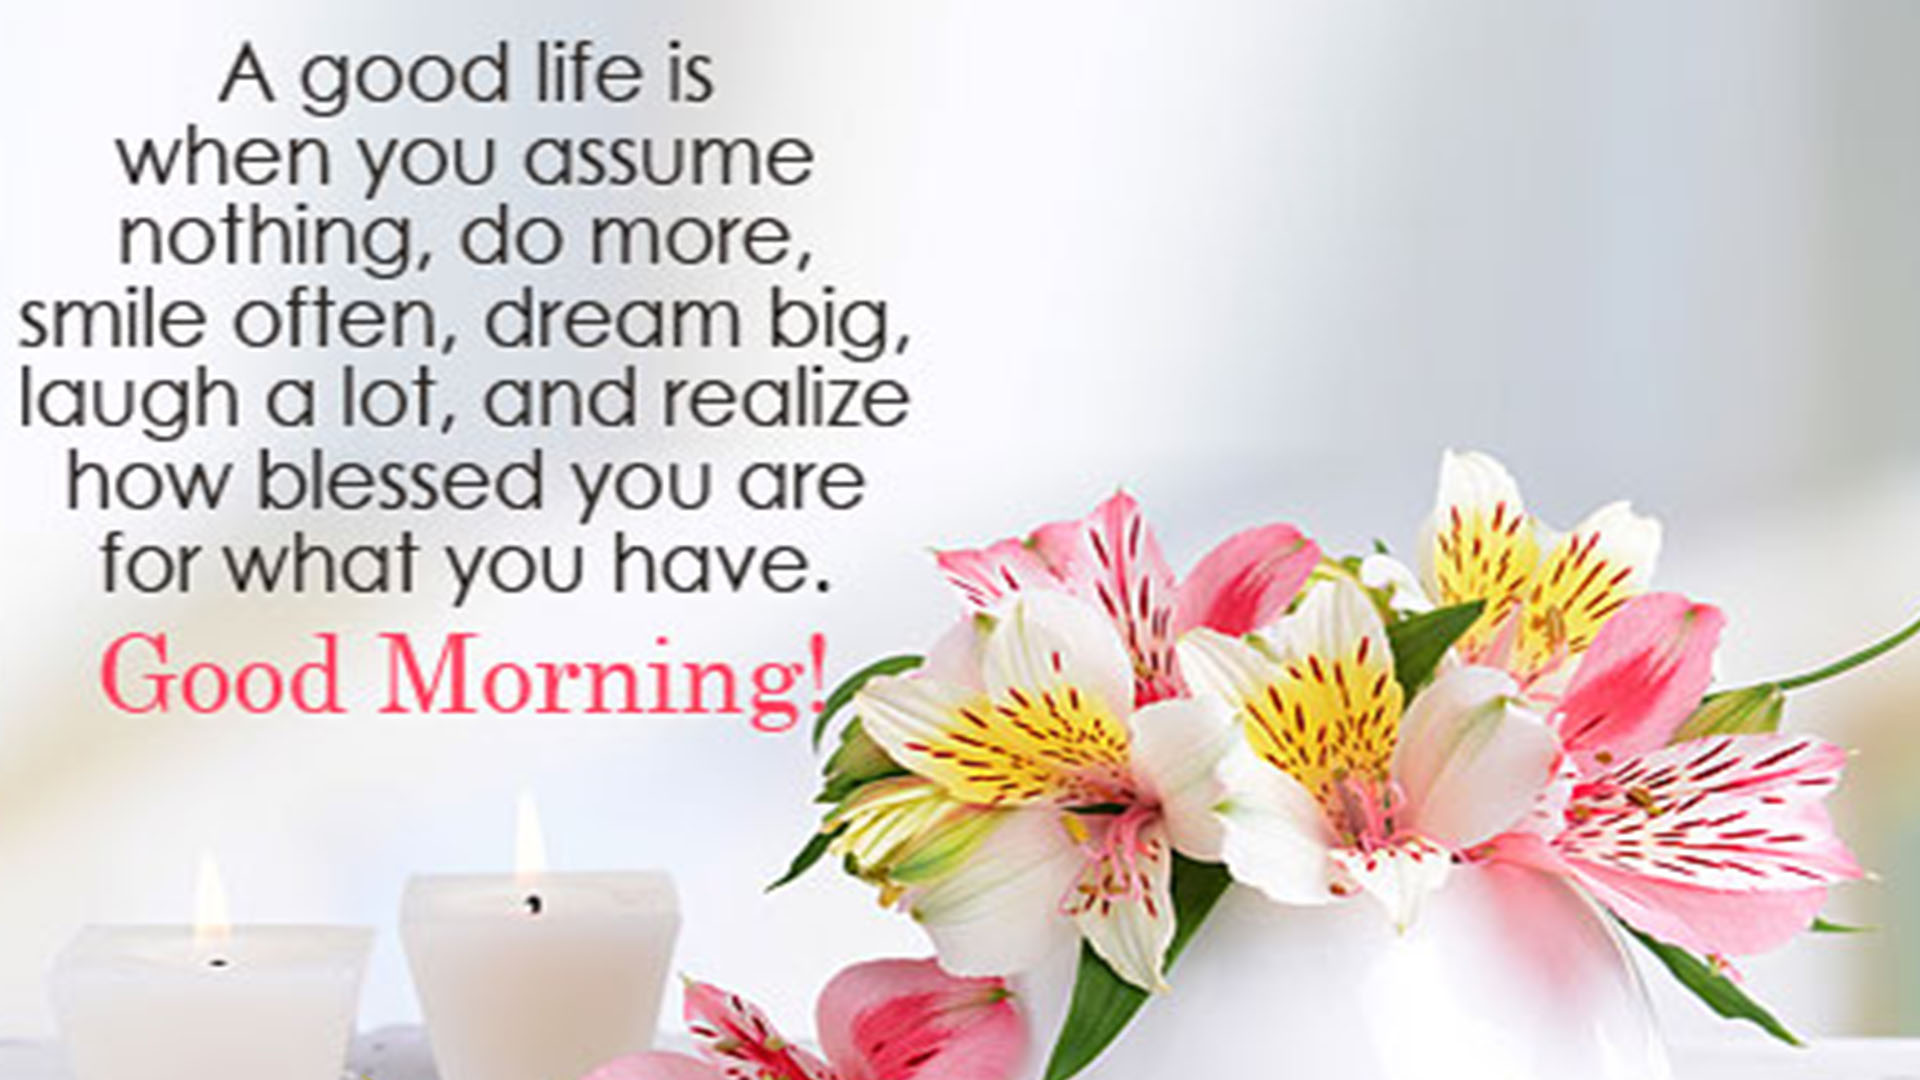 good morning messages hd image